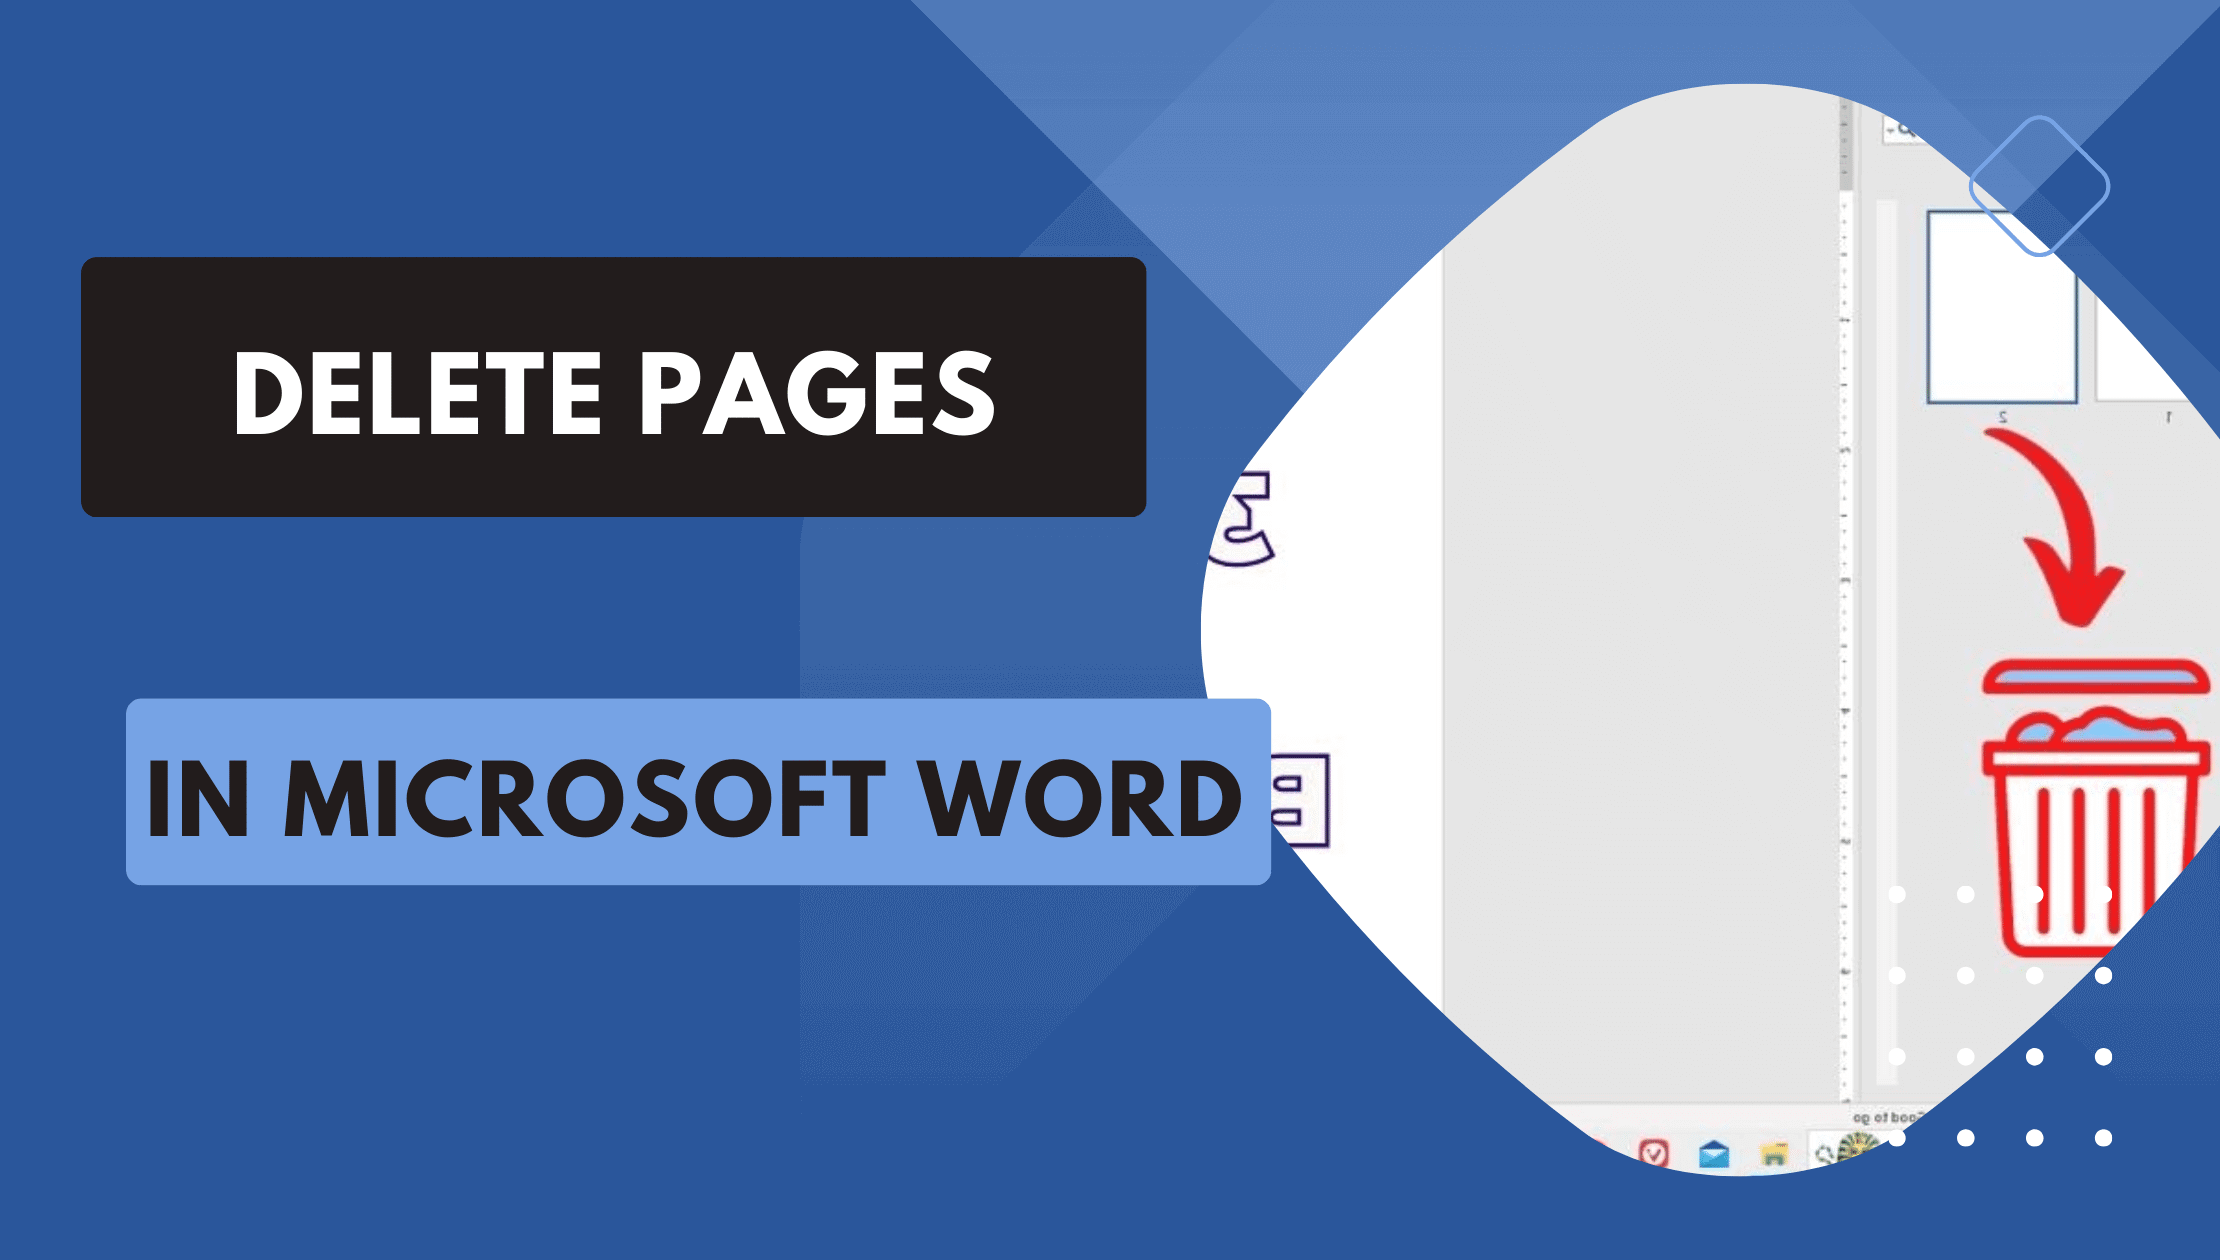 7 Easy Steps to Quickly Delete Pages in Microsoft Word Like a Pro